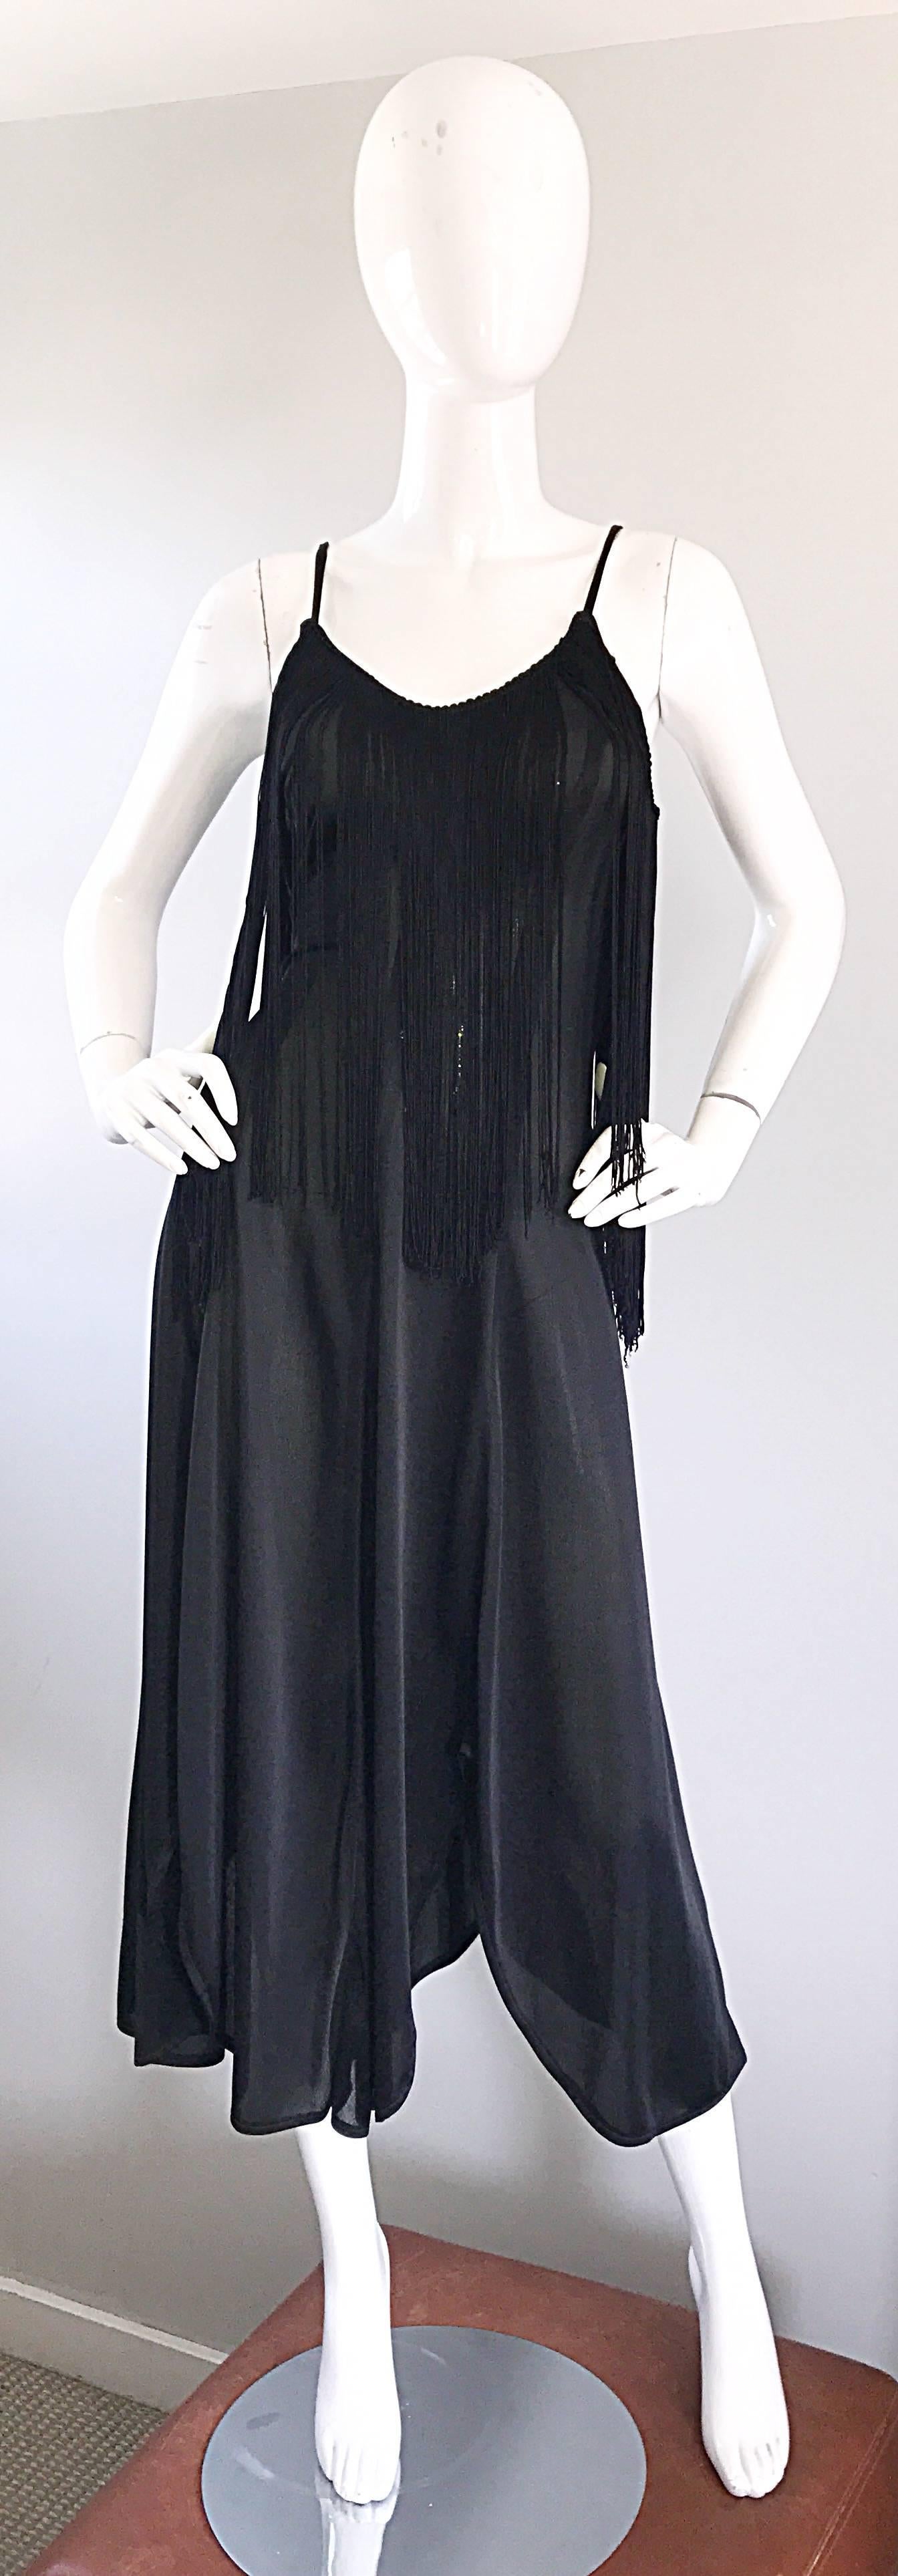 Incredible 70s black disco fringe dress! Features a flirty handkerchief hem, with a tailored bodice. Tons of fringe at the bust makes for a great dancing dress! There is definitely an ode to the 1920s / 20s with this amazing gem! Very well made,